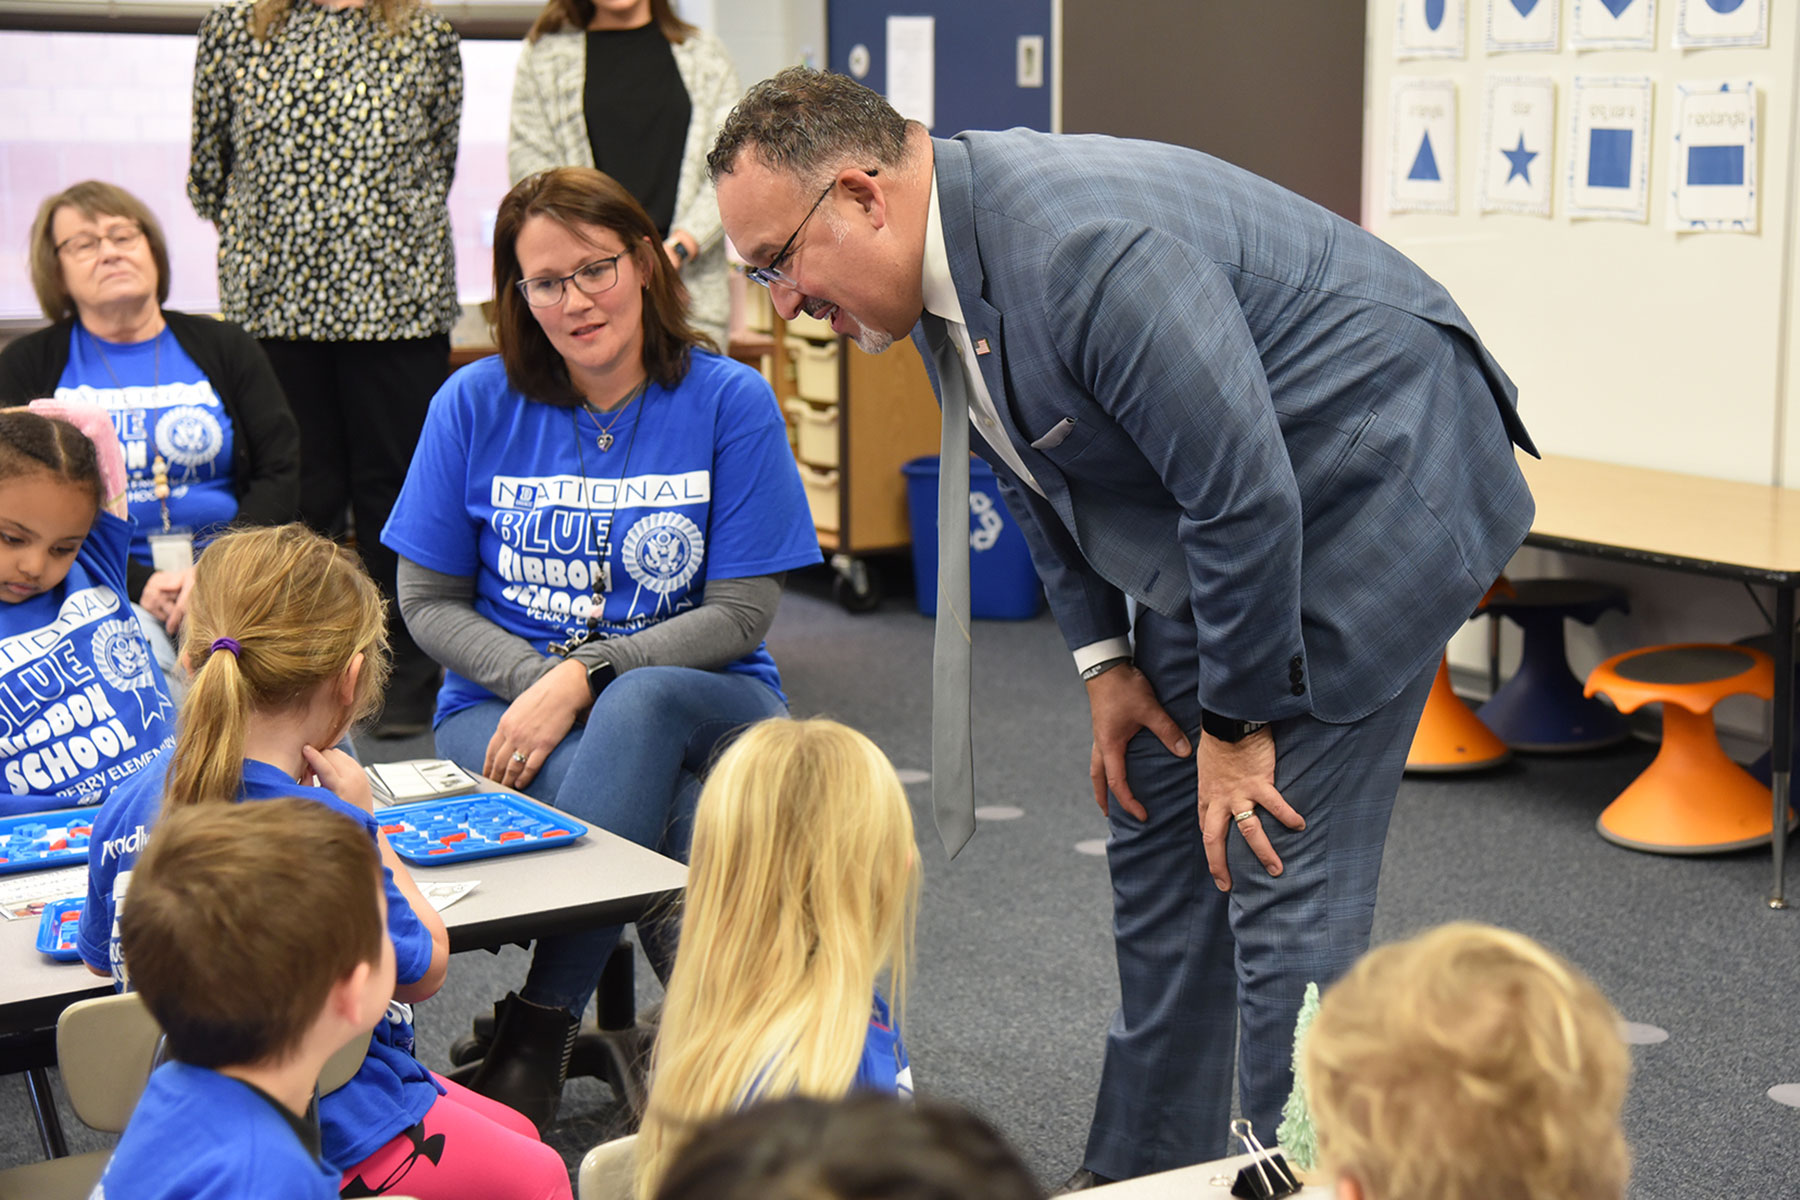 U.S. Secretary of Education Dr. Miguel Cardona​ meets pre-school students while visiting a classroom at Perry Elementary School on Dec. 7, 2023, during his visit to Iowa. Seated next to Cardona is Felicia Moe, ​who began working as a paraeducator at Perry Elementary in 2018 through the Teacher Paraprofessional Registered Apprenticeship Program in collaboration with DMACC and UNI.